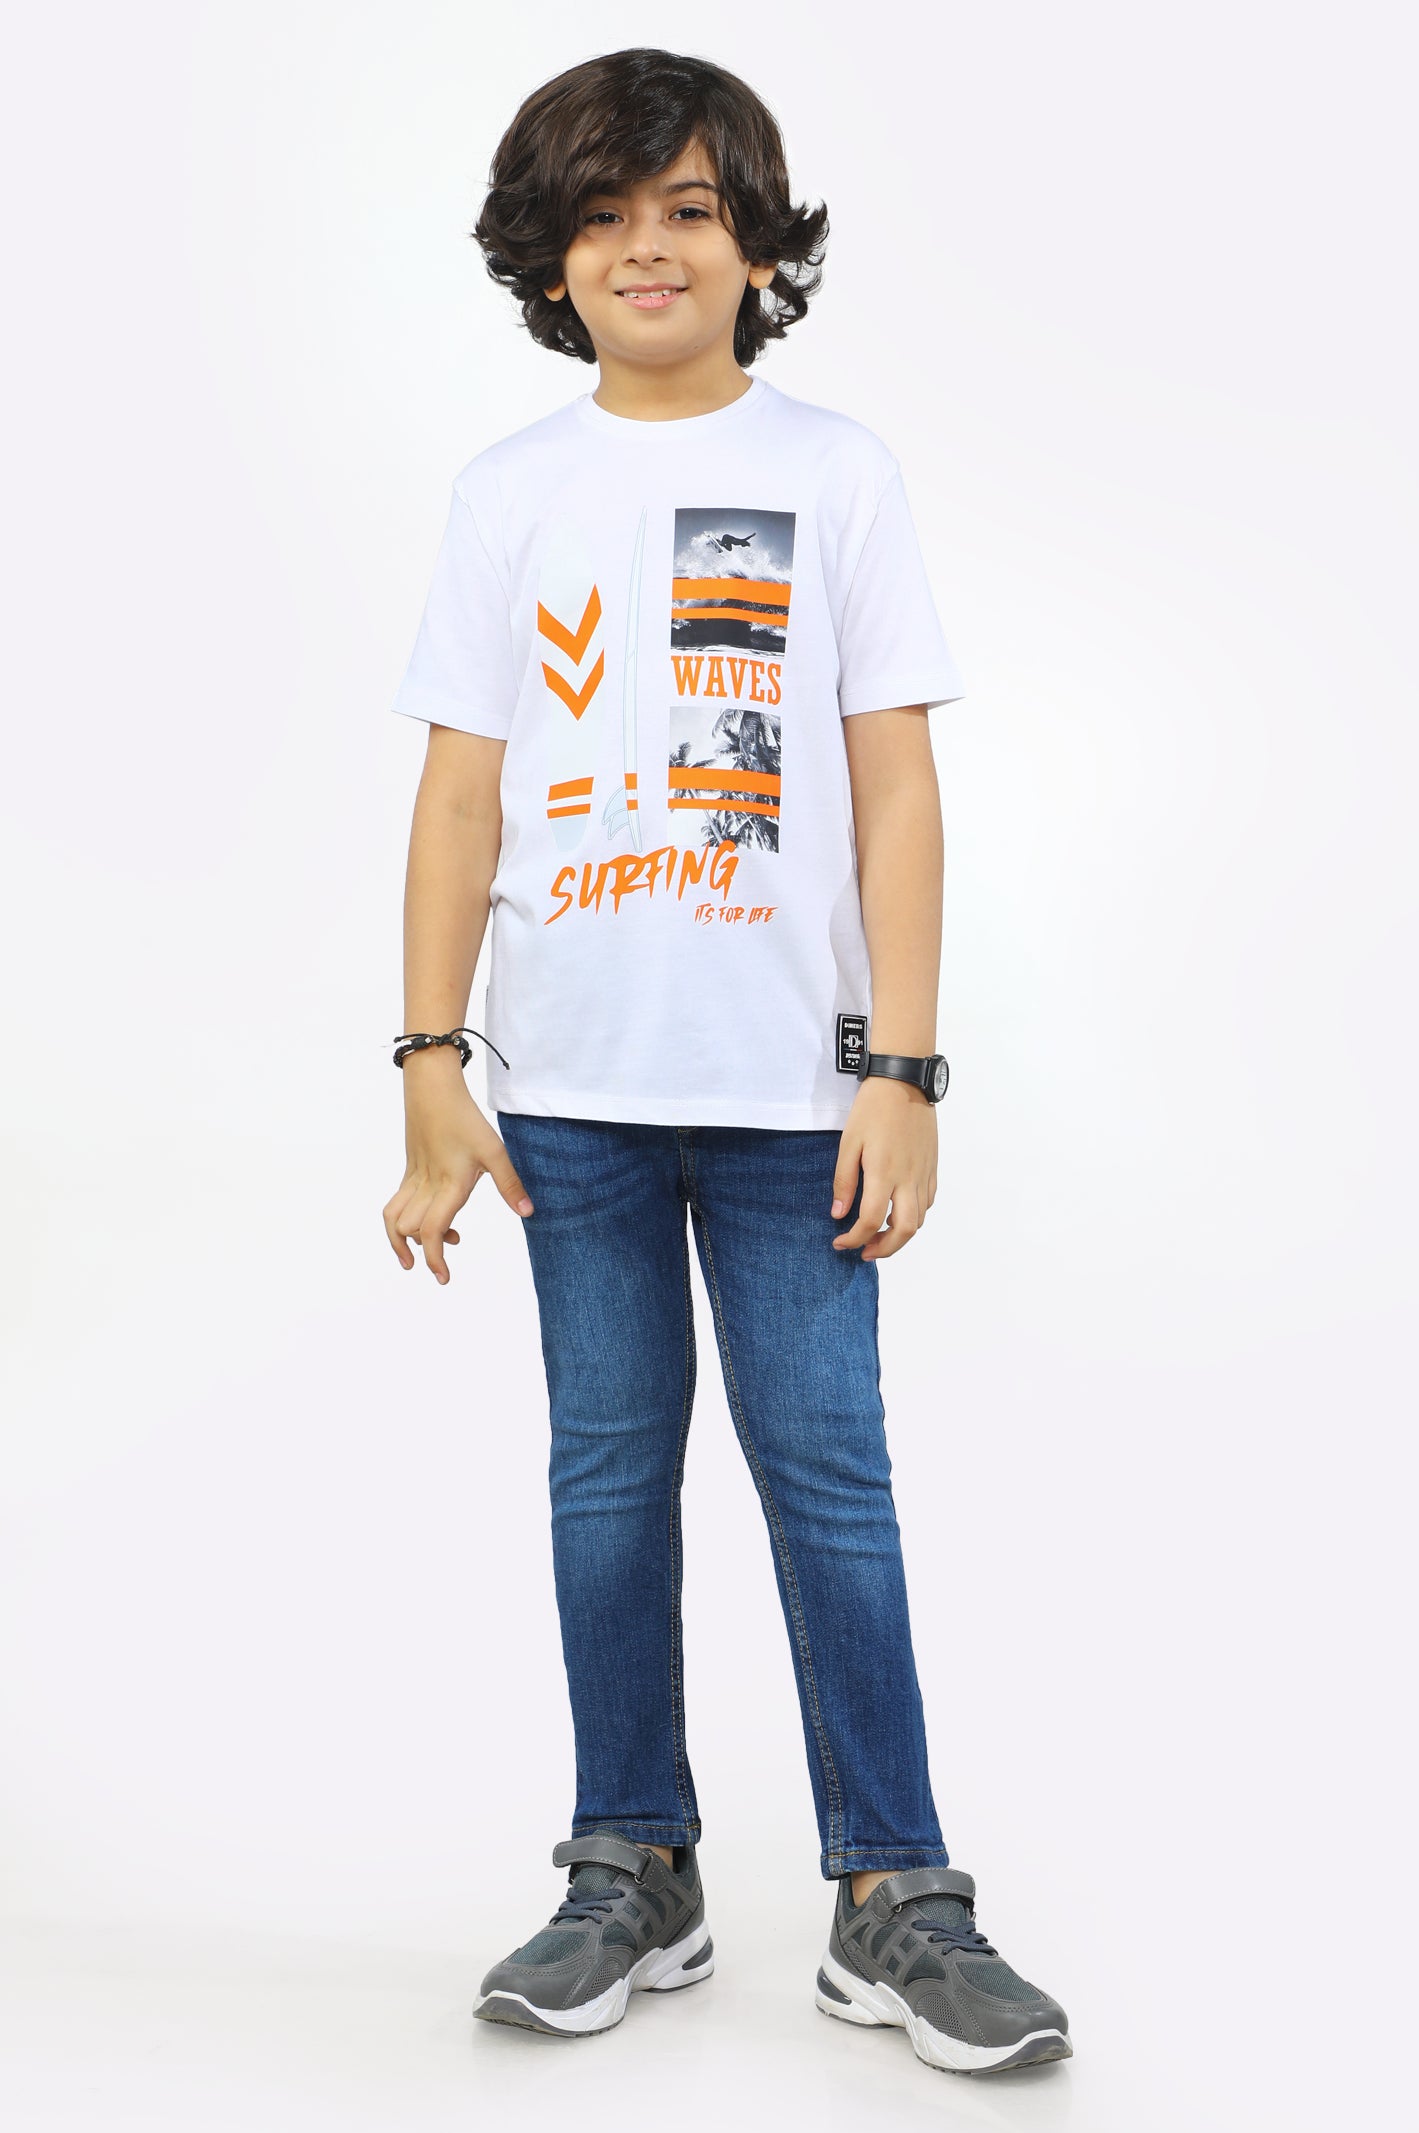 Graphic Printed T-Shirt From Diners